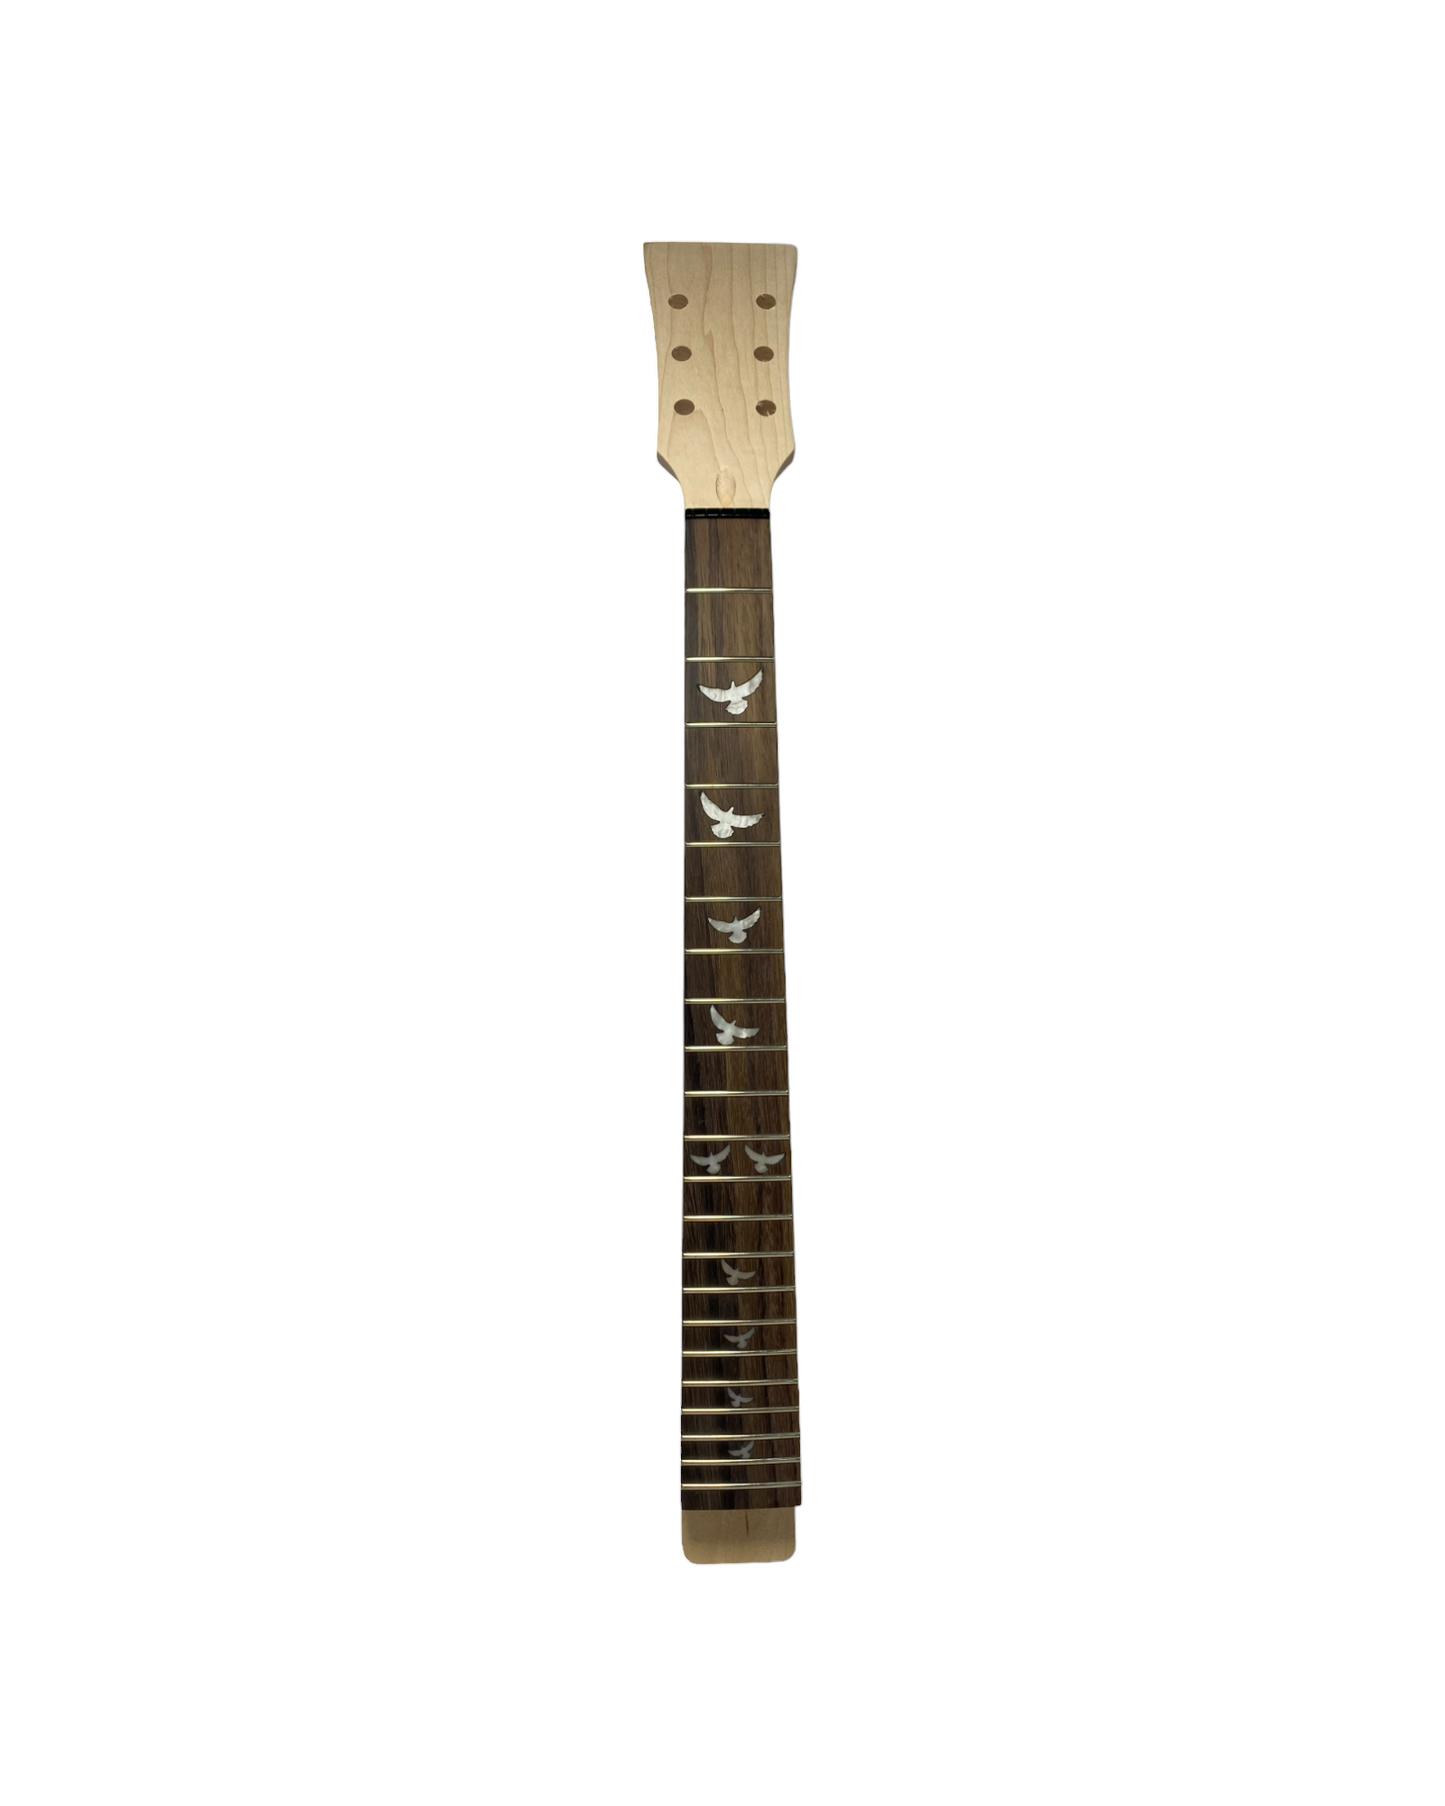 PRS1988DIY Style Electric Guitar DIY Kit, Complete No-Soldering, Mahogany Body with Ash Top